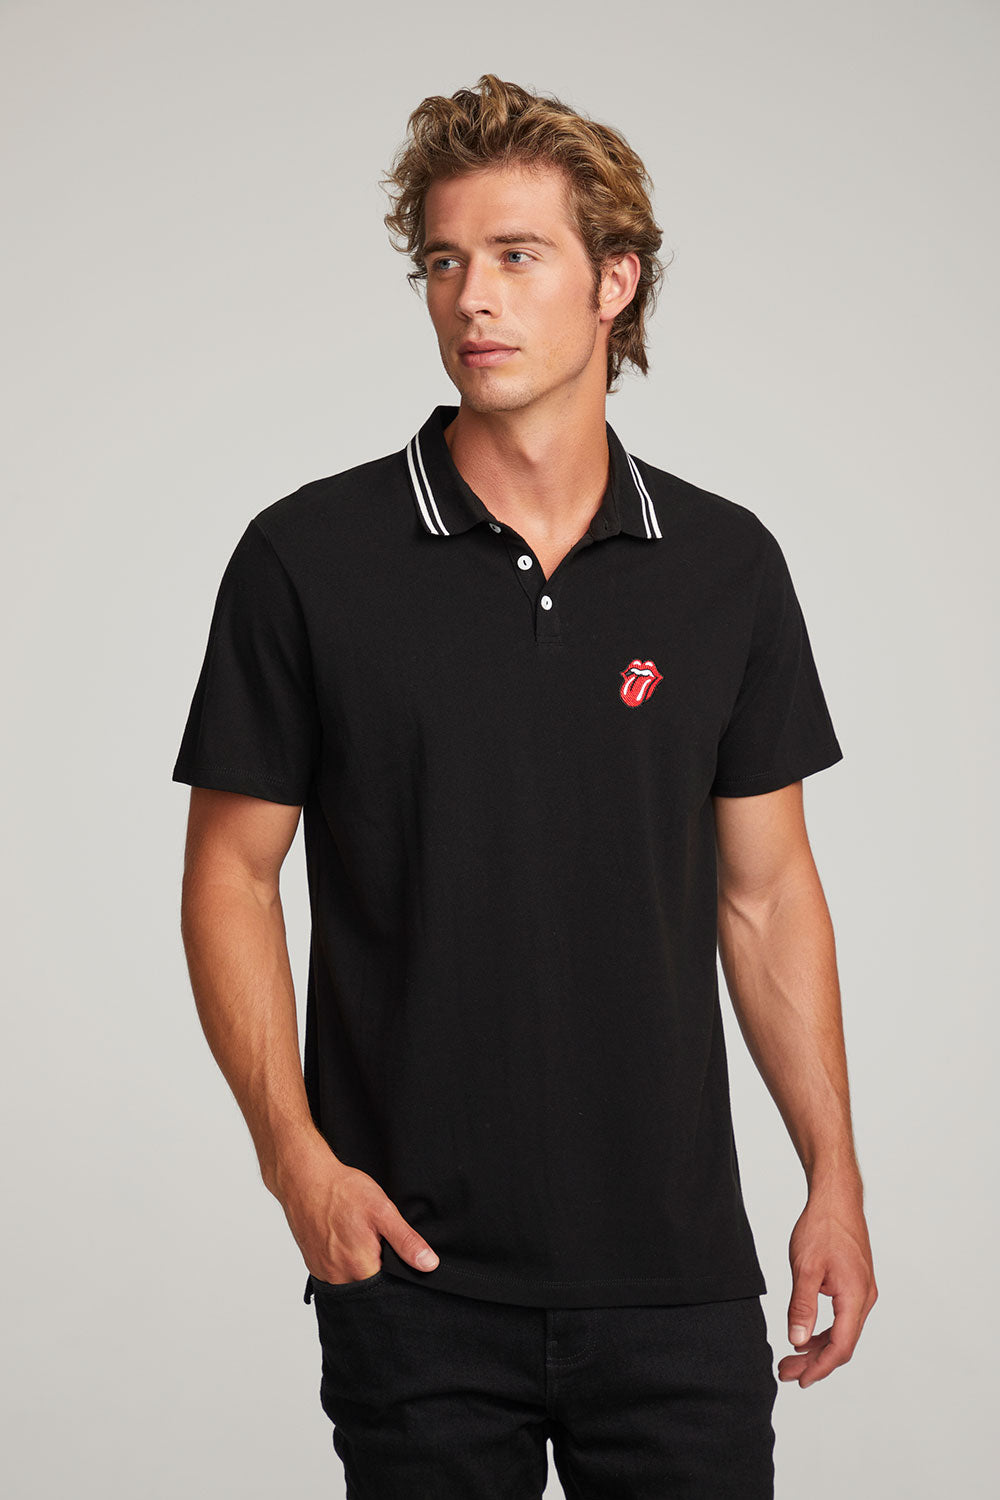 Rolling Stones Embroidered Logo Mens Polo Tee MENS chaserbrand